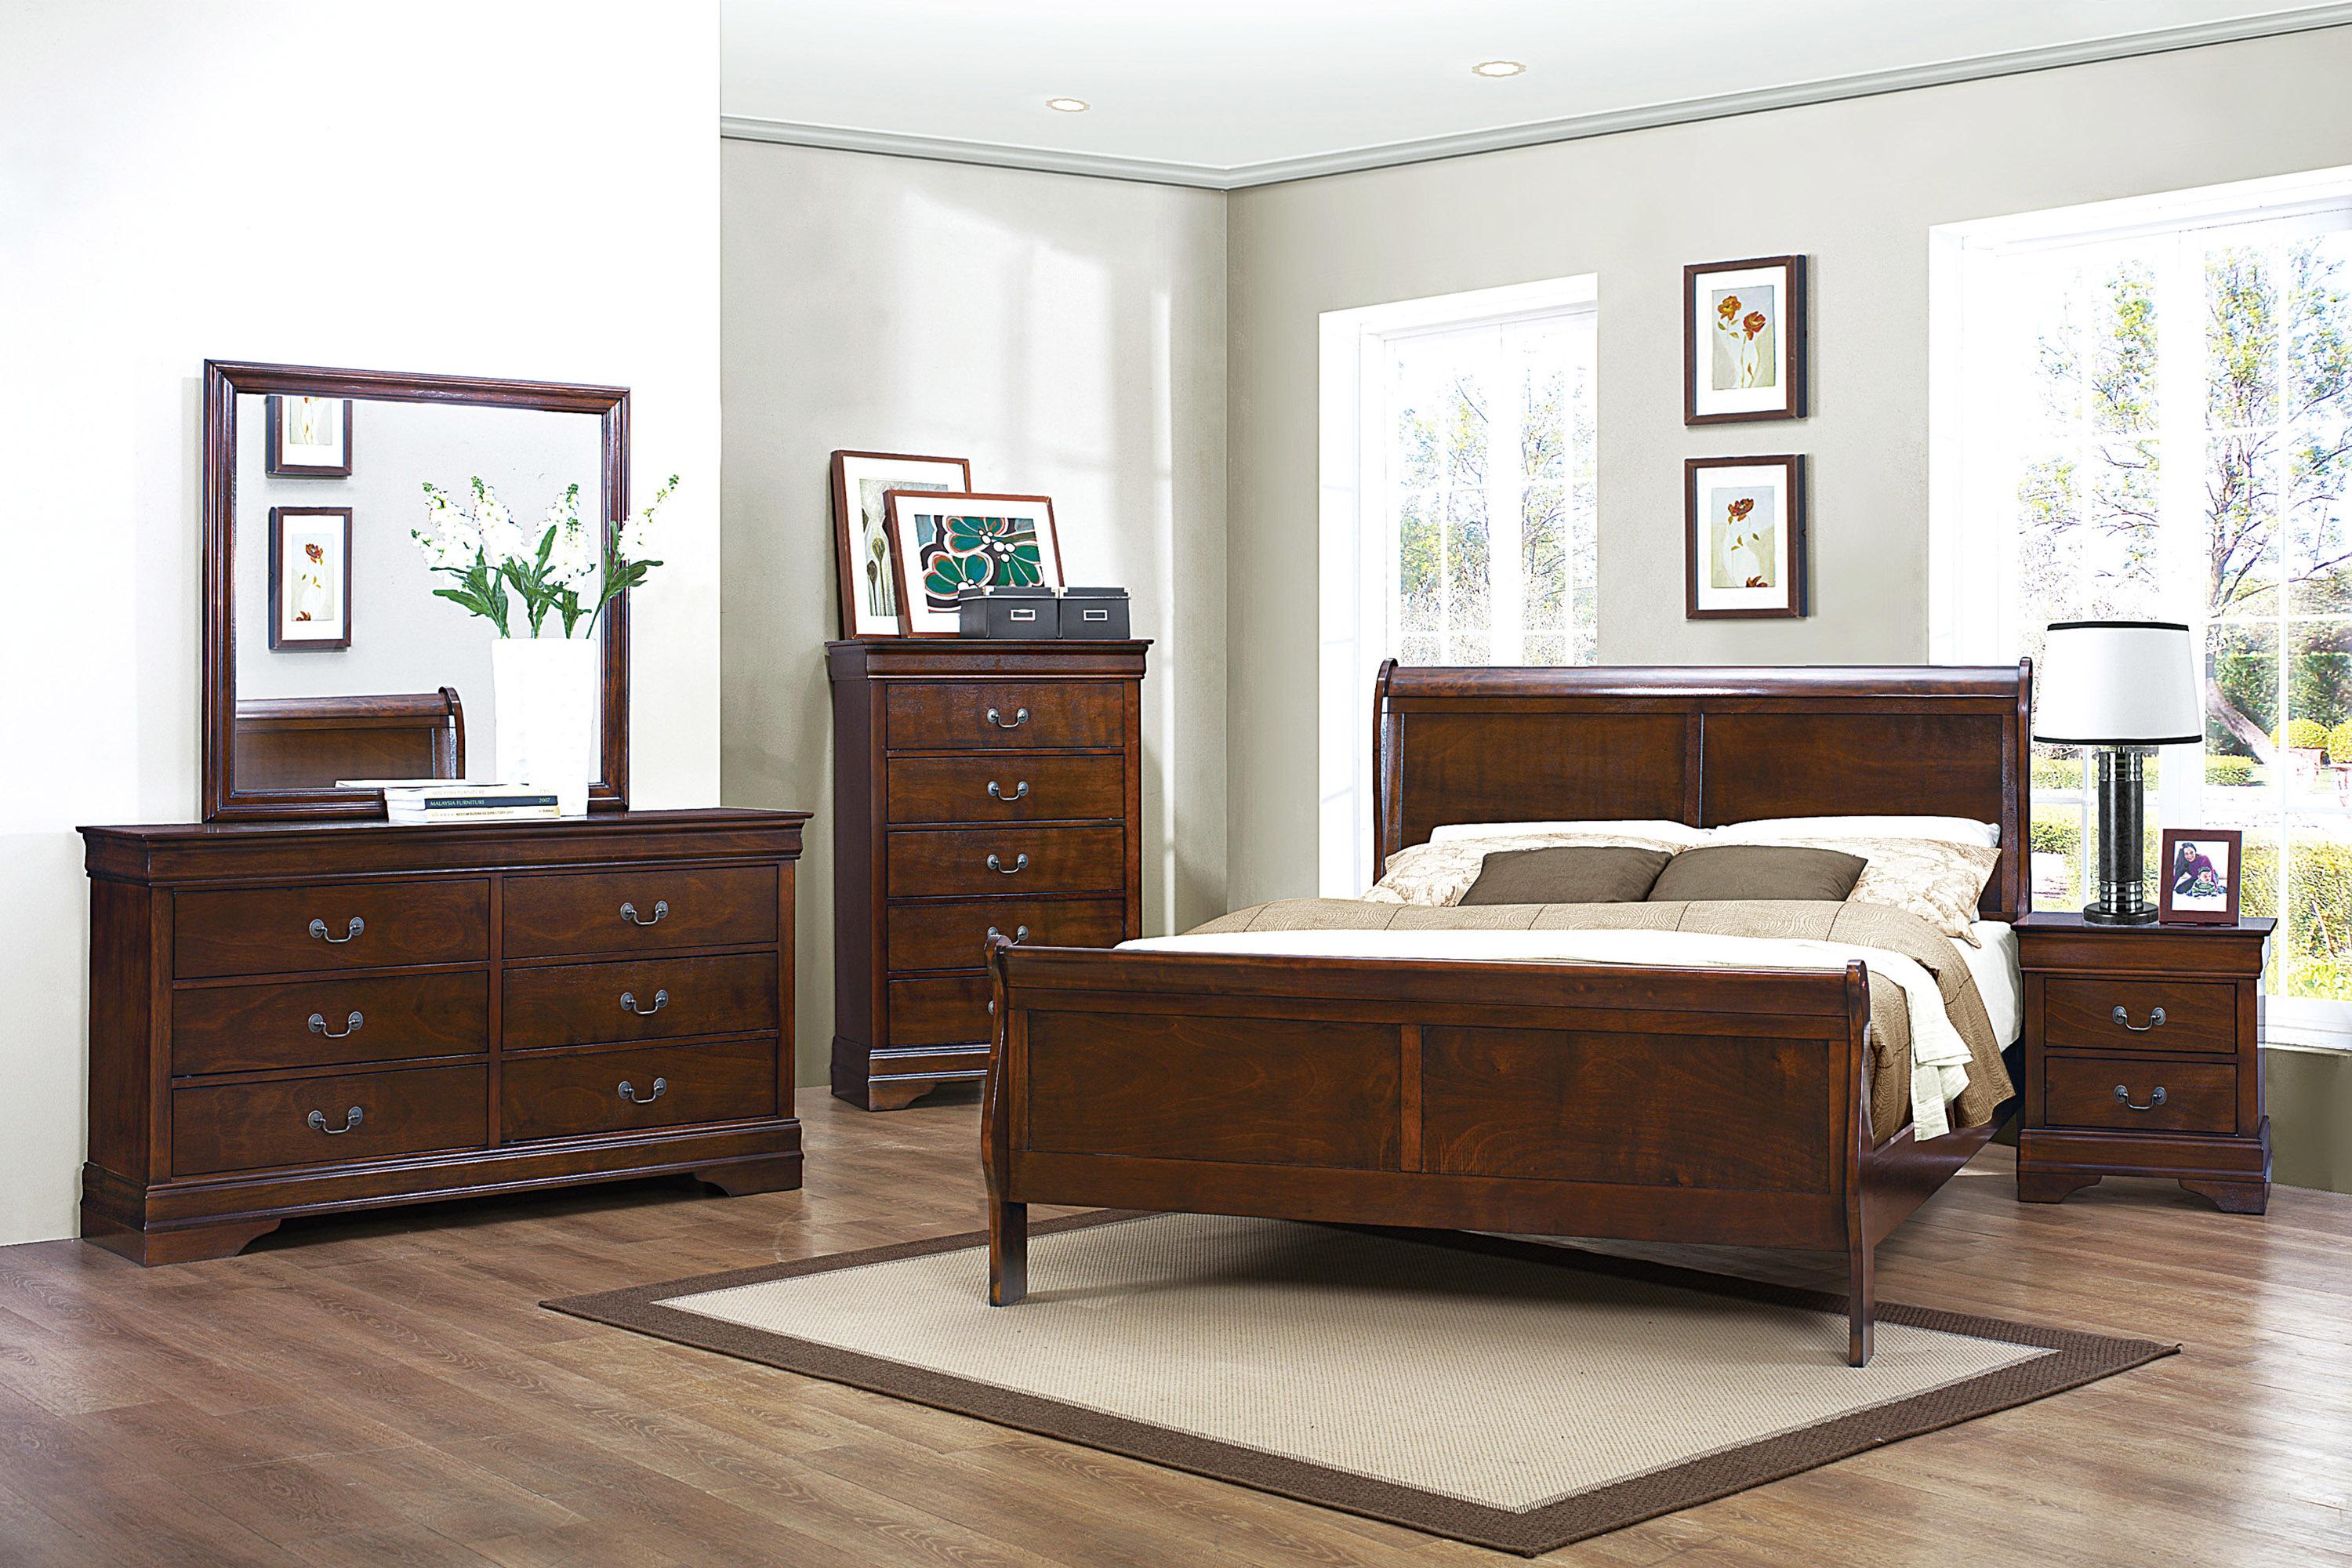 Traditional Bedroom Set 2147-1-5PC Mayville 2147-1-5PC in Cherry 